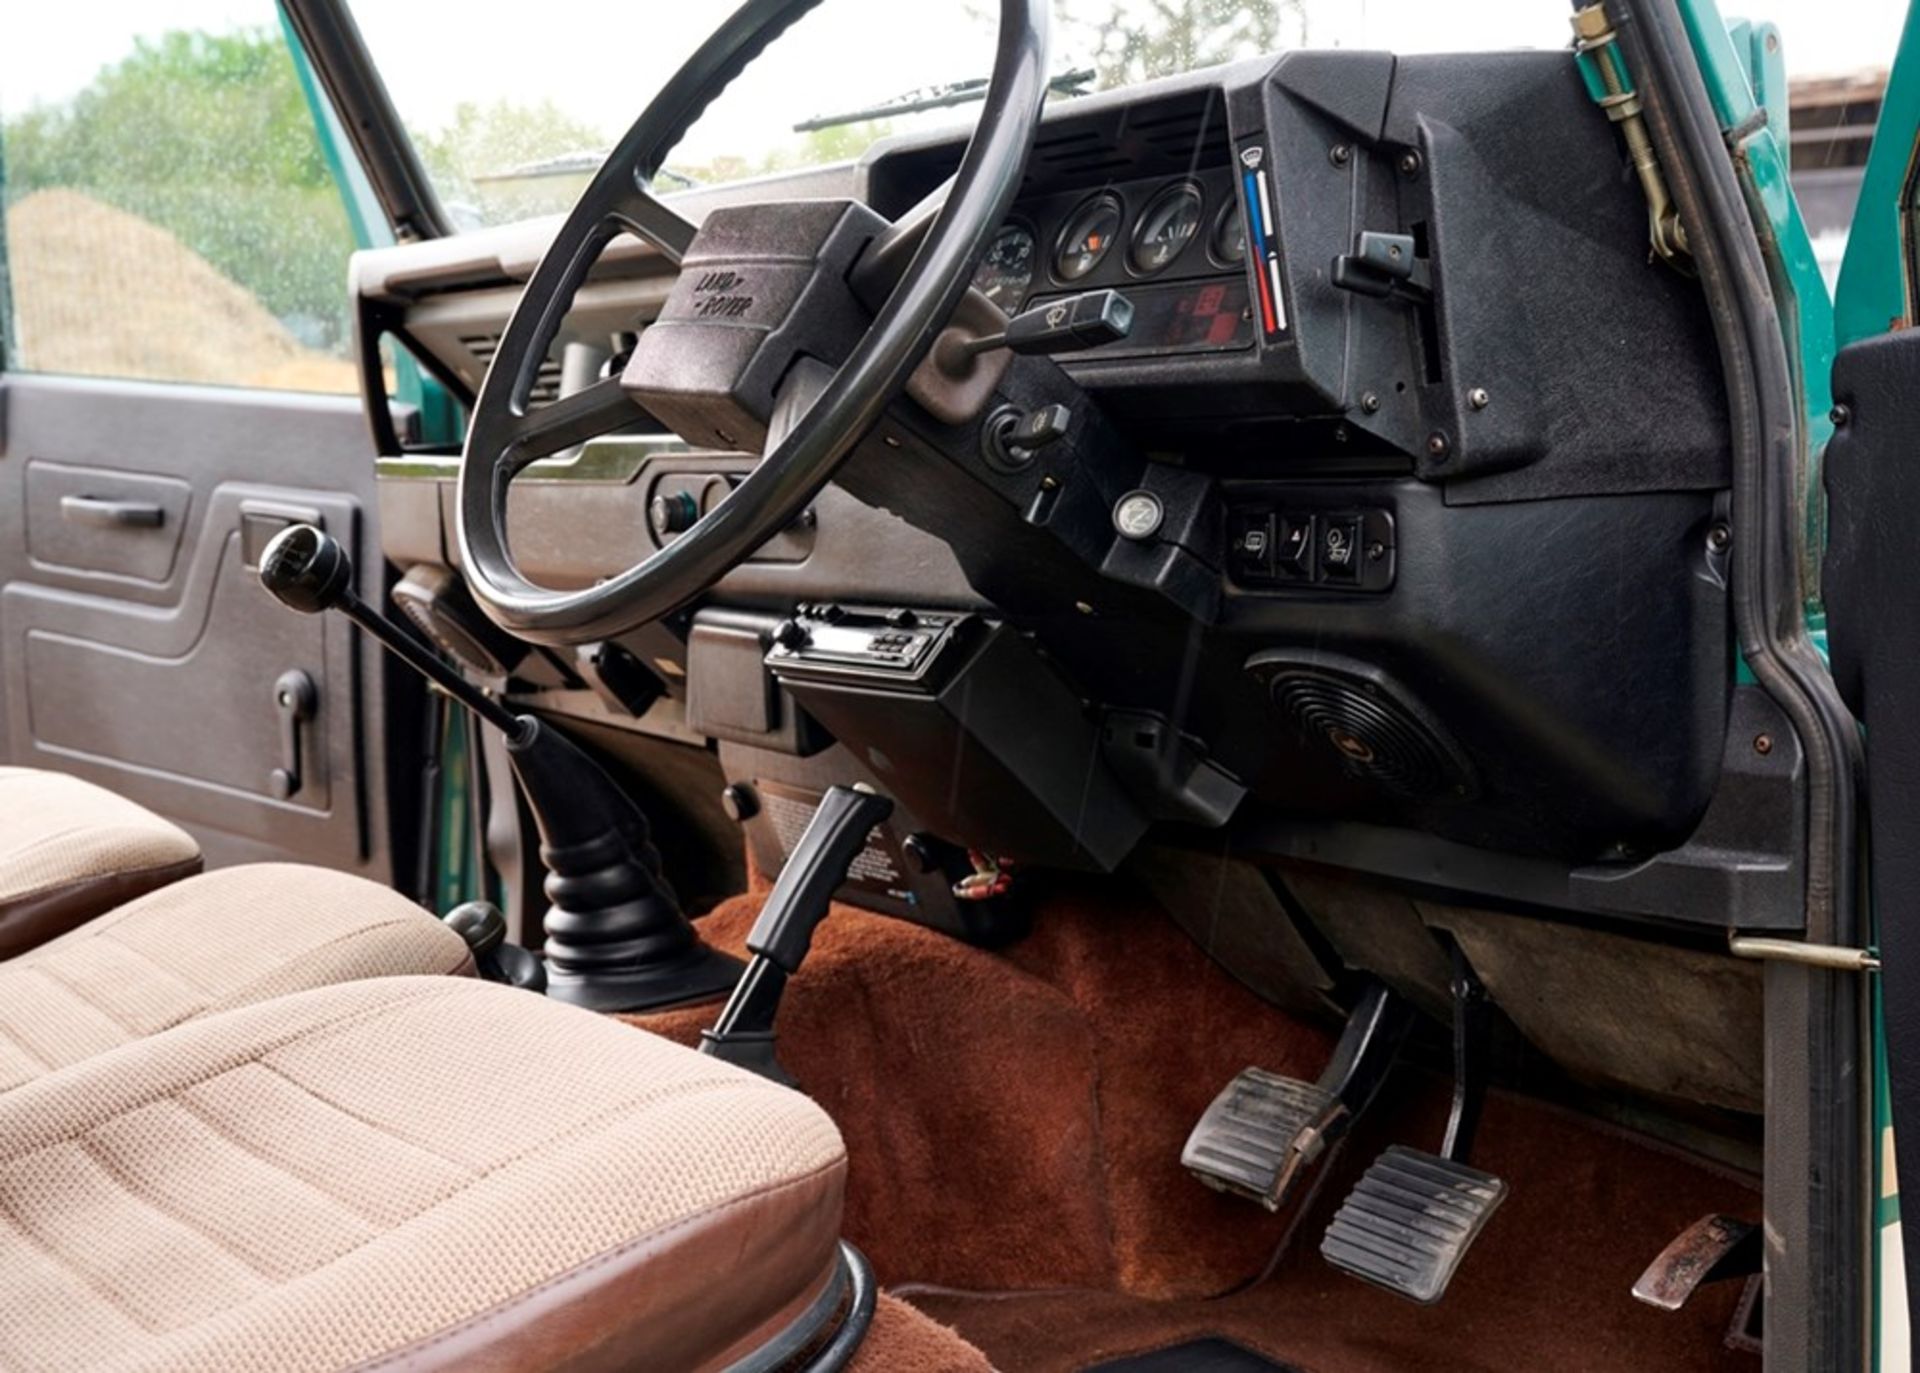 1985 Land Rover 90 County Station Wagon - Image 6 of 9